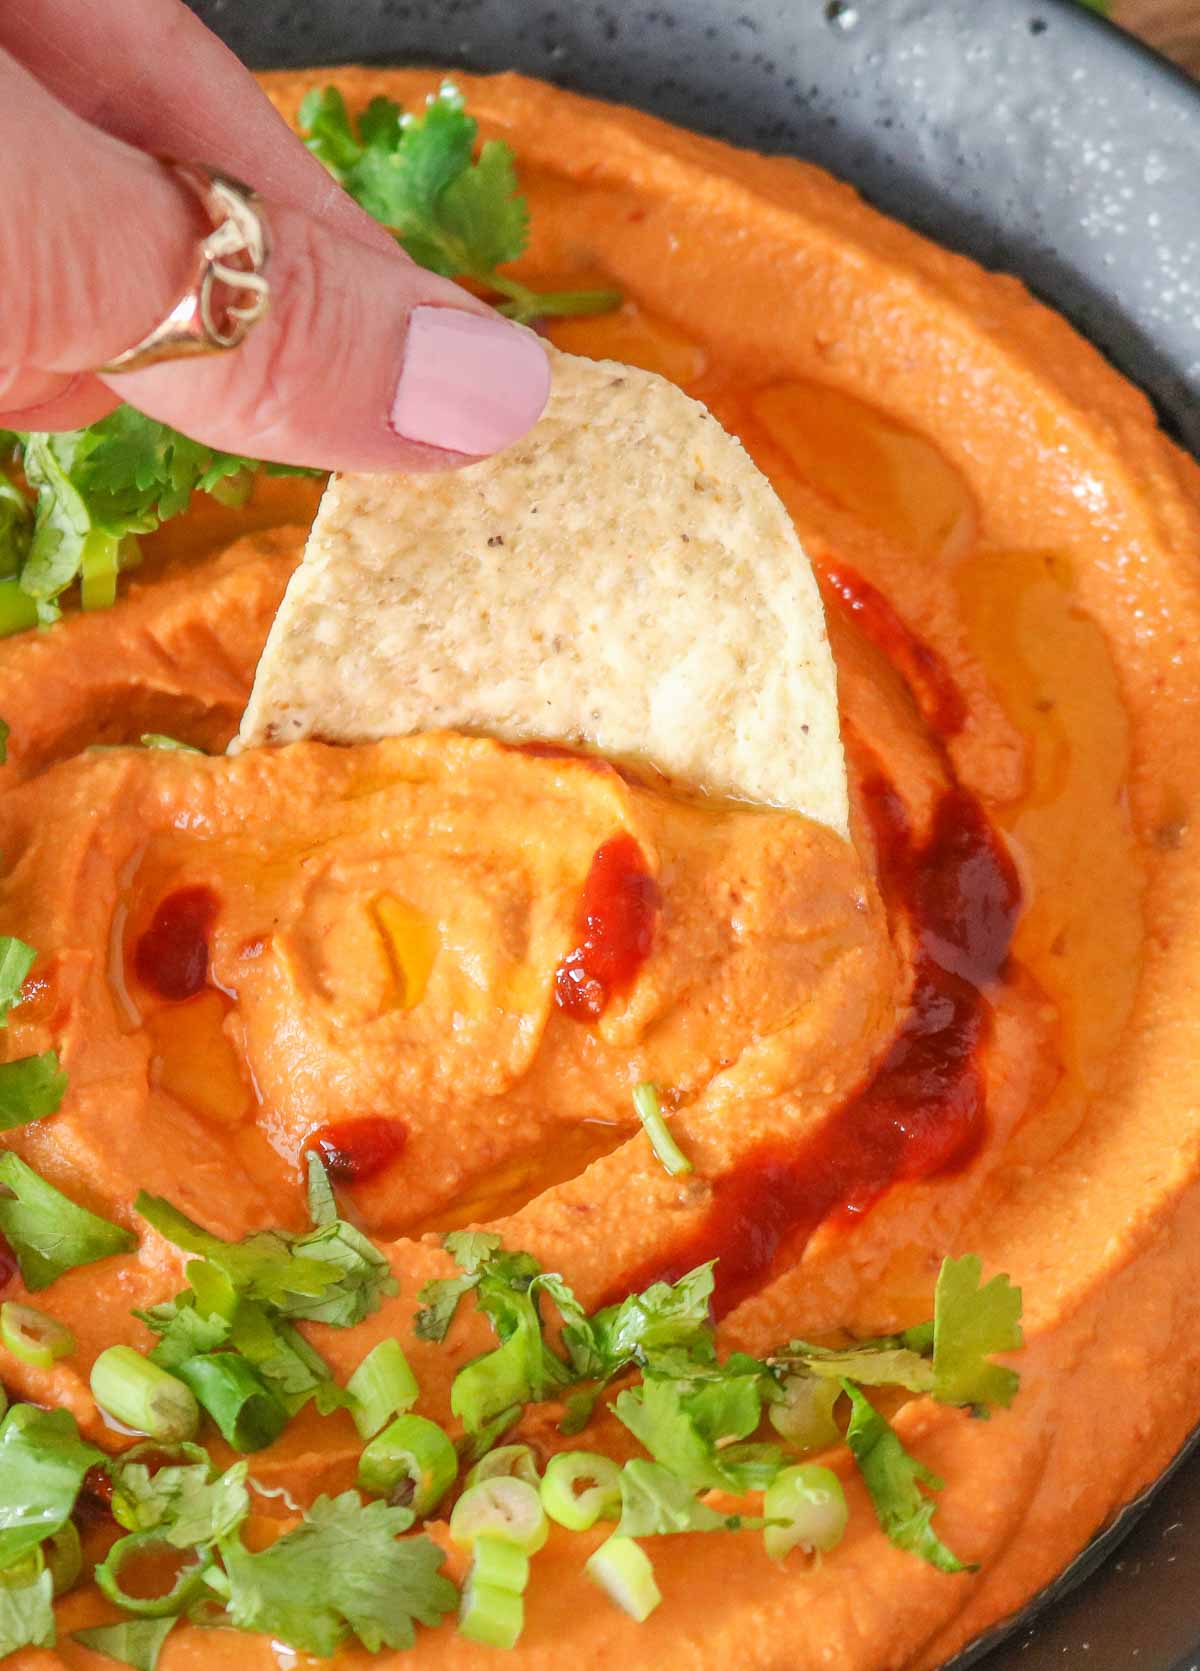 Hand holding a tortilla chip, dipping it into a bowl of hummus.